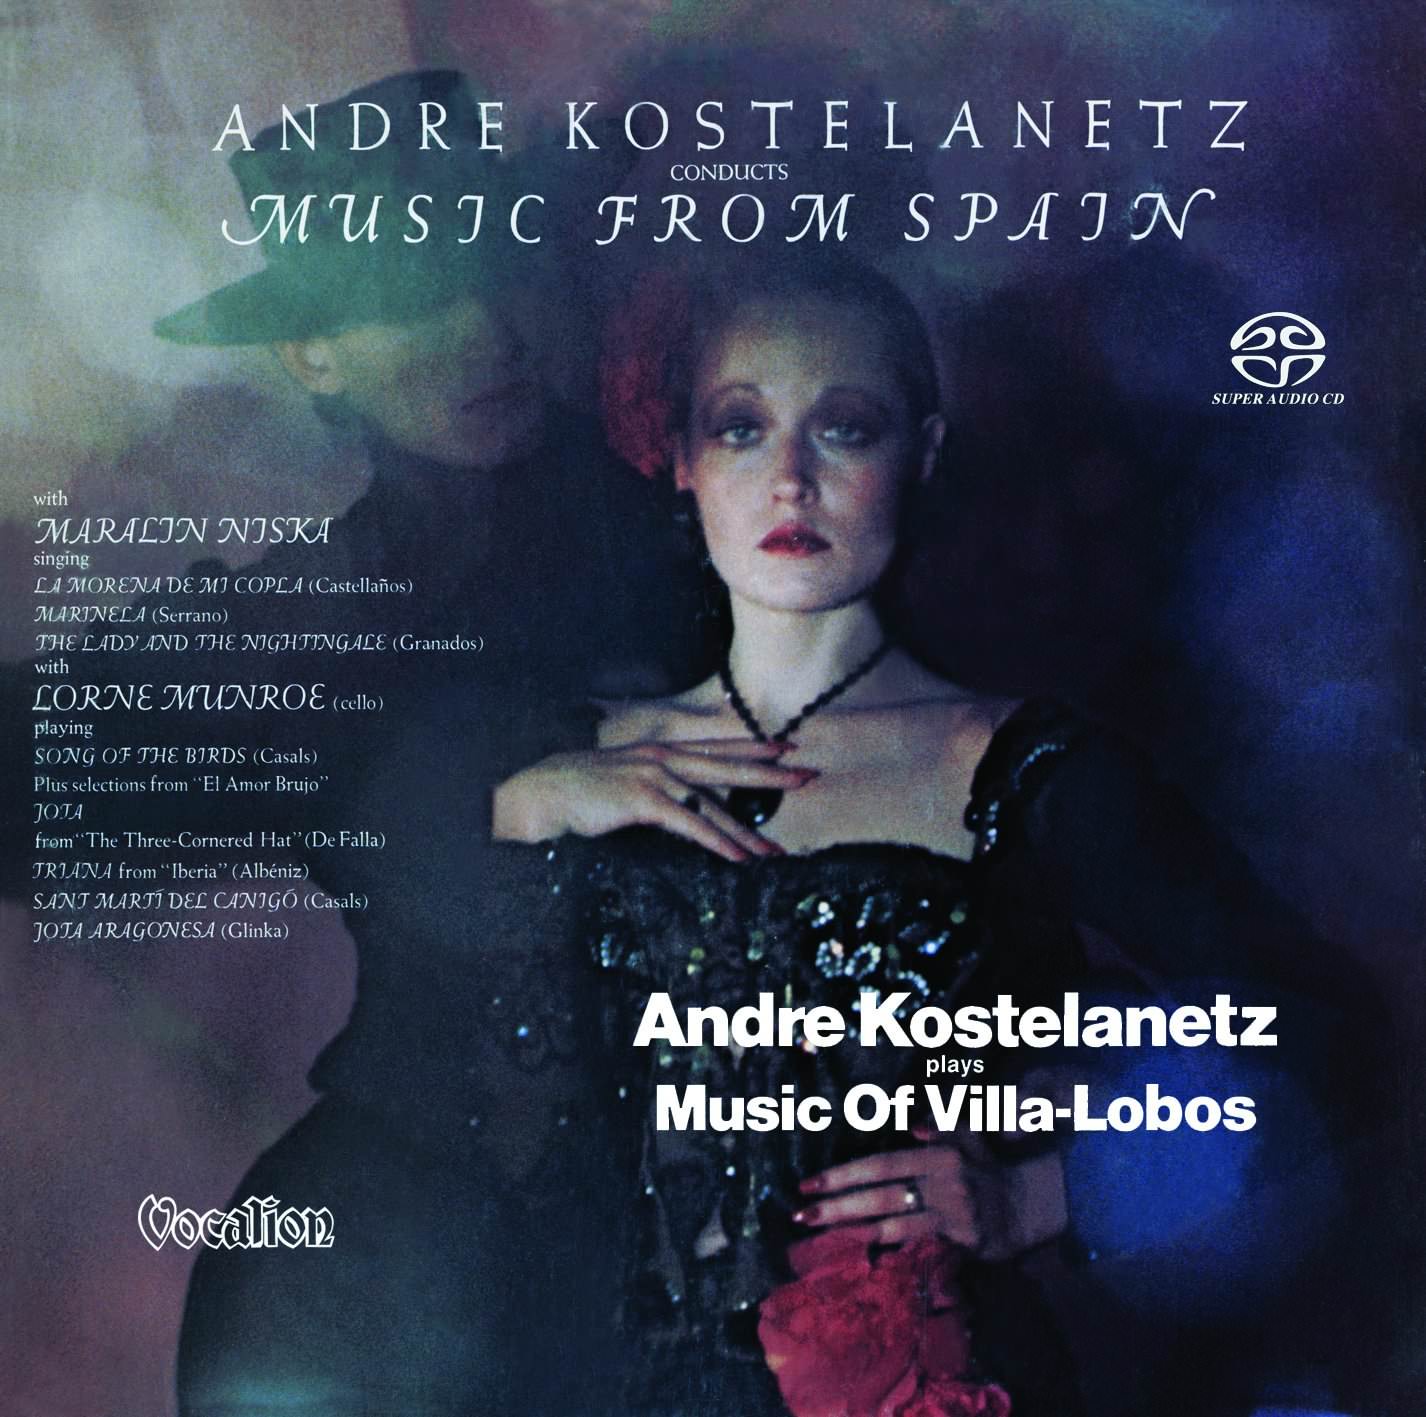 Andre Kostelanetz - Plays Music Of Villa-Lobos & Conducts Music From Spain (1974) [Reissue 2017] {SACD ISO + FLAC 24bit/88,2kHz}